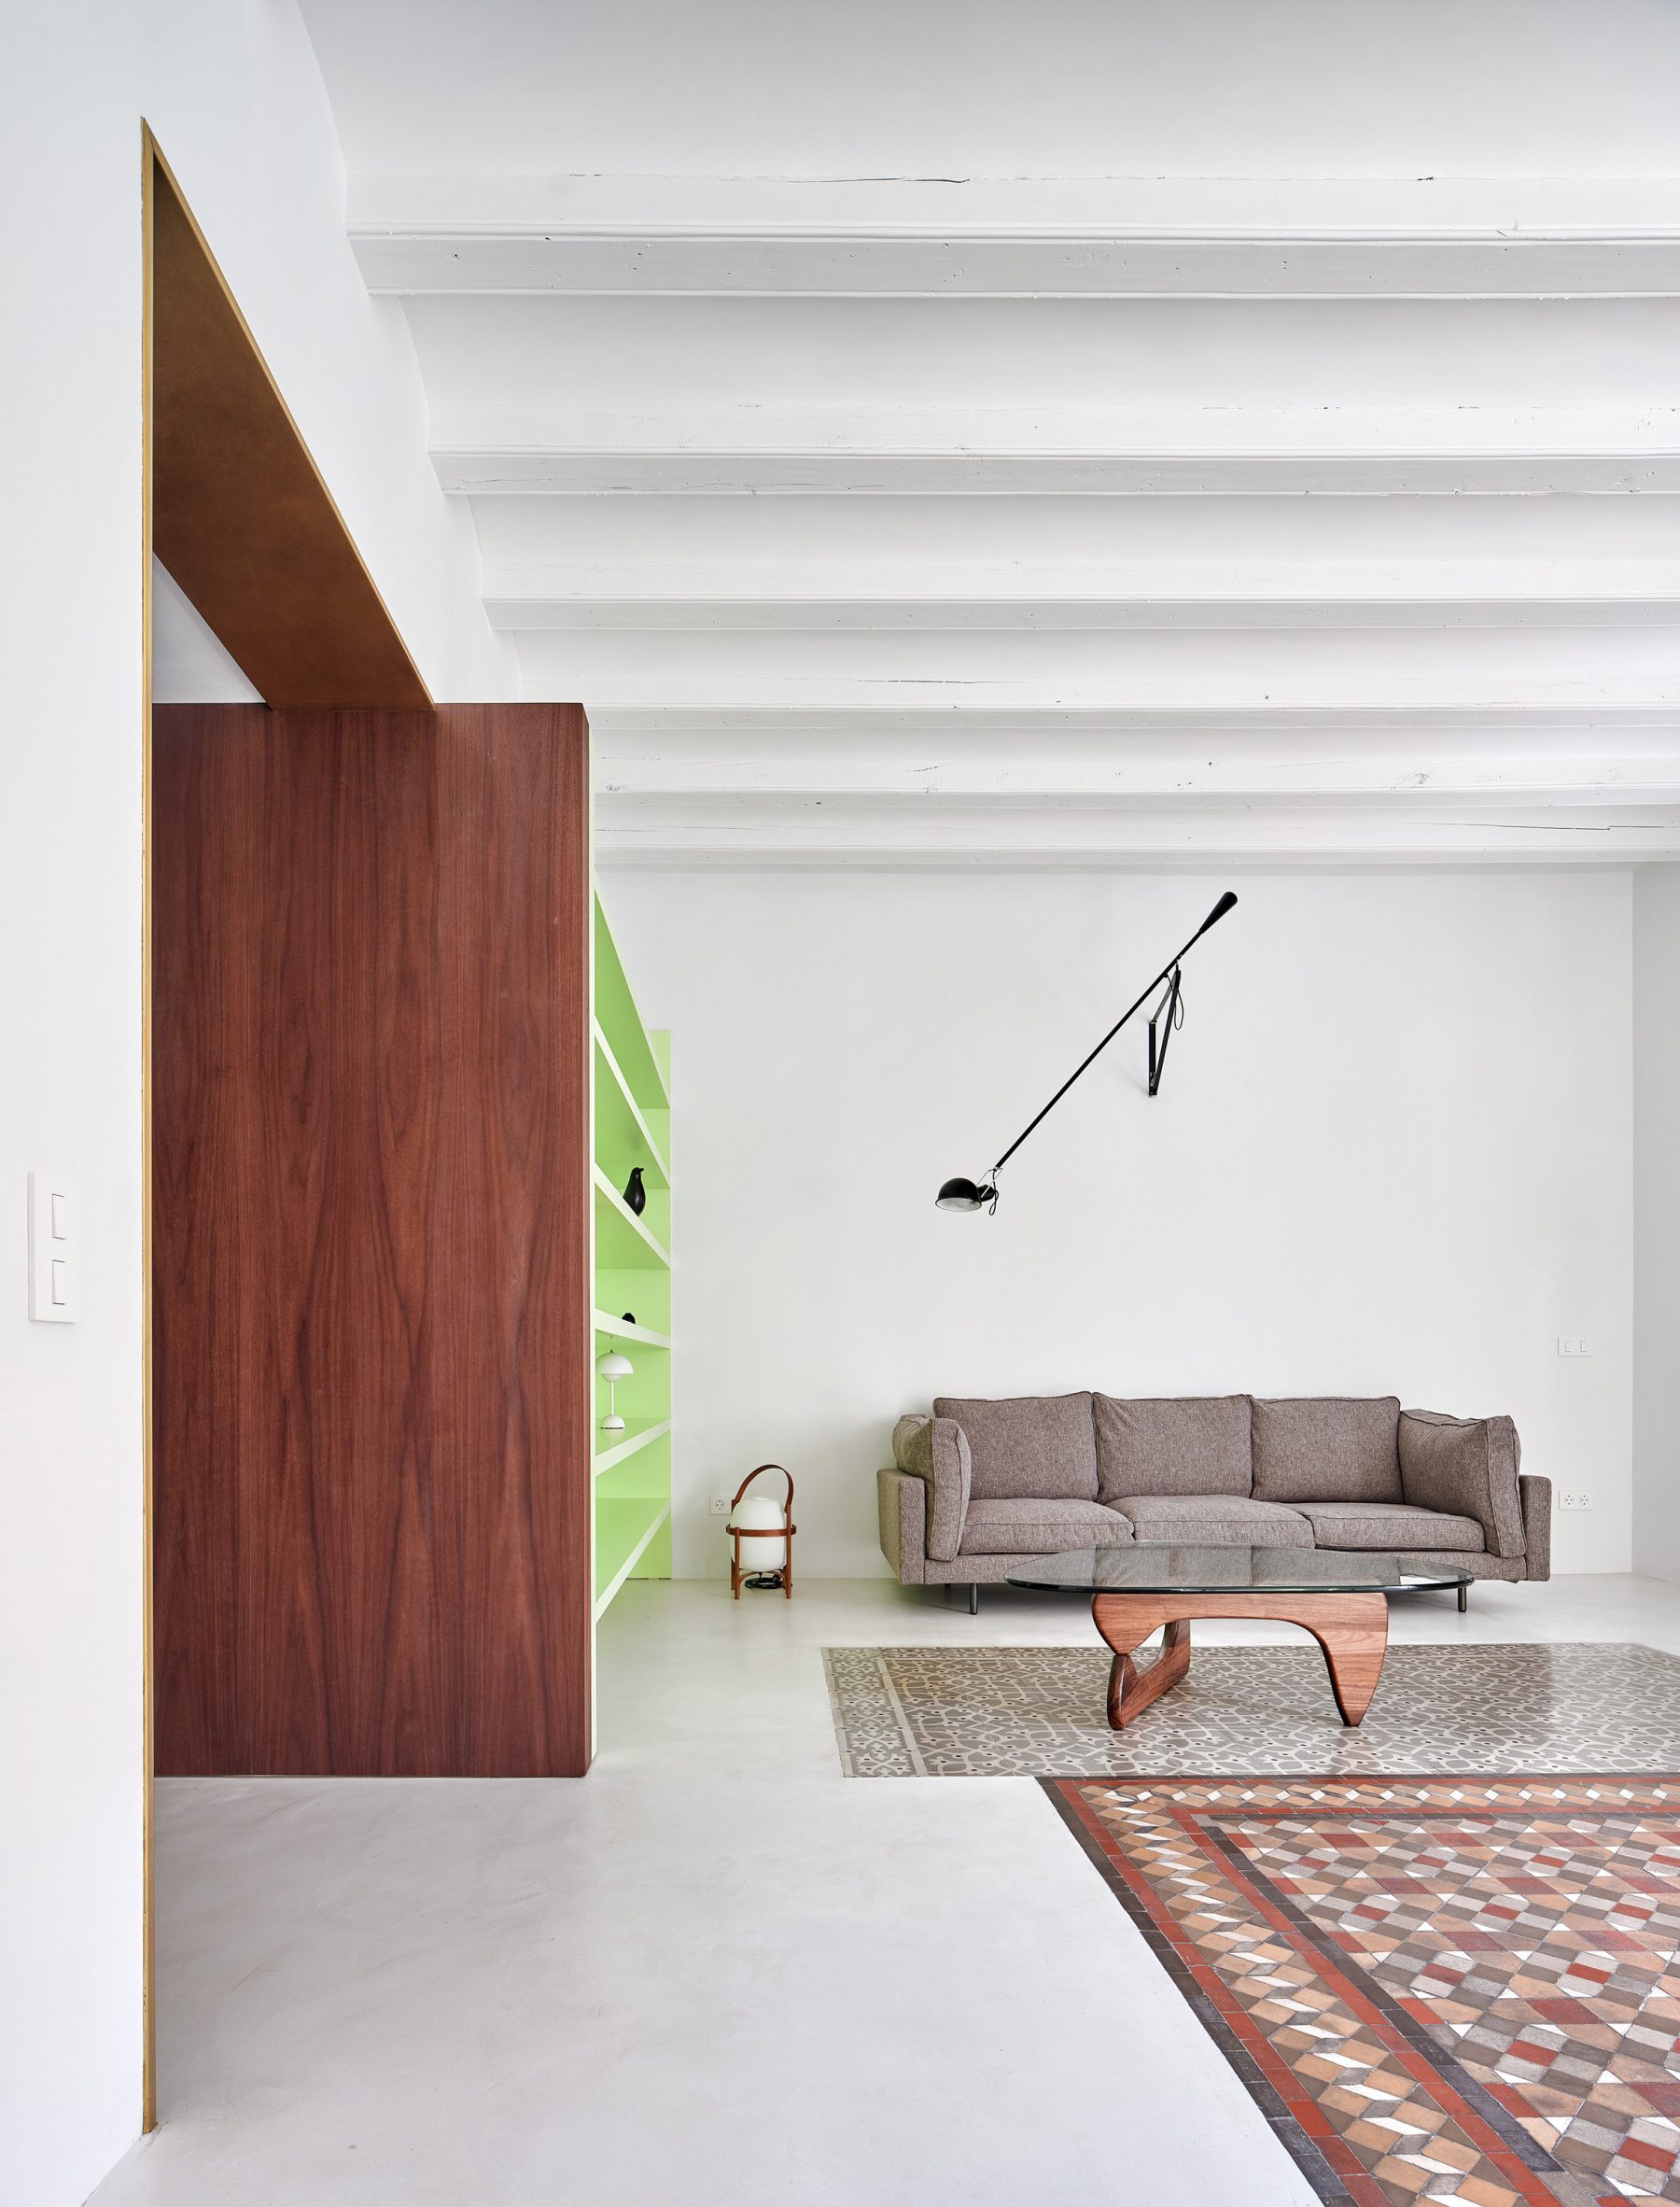 Living room interior of apartment in Barcelona, designed by Raúl Sanchez Architects